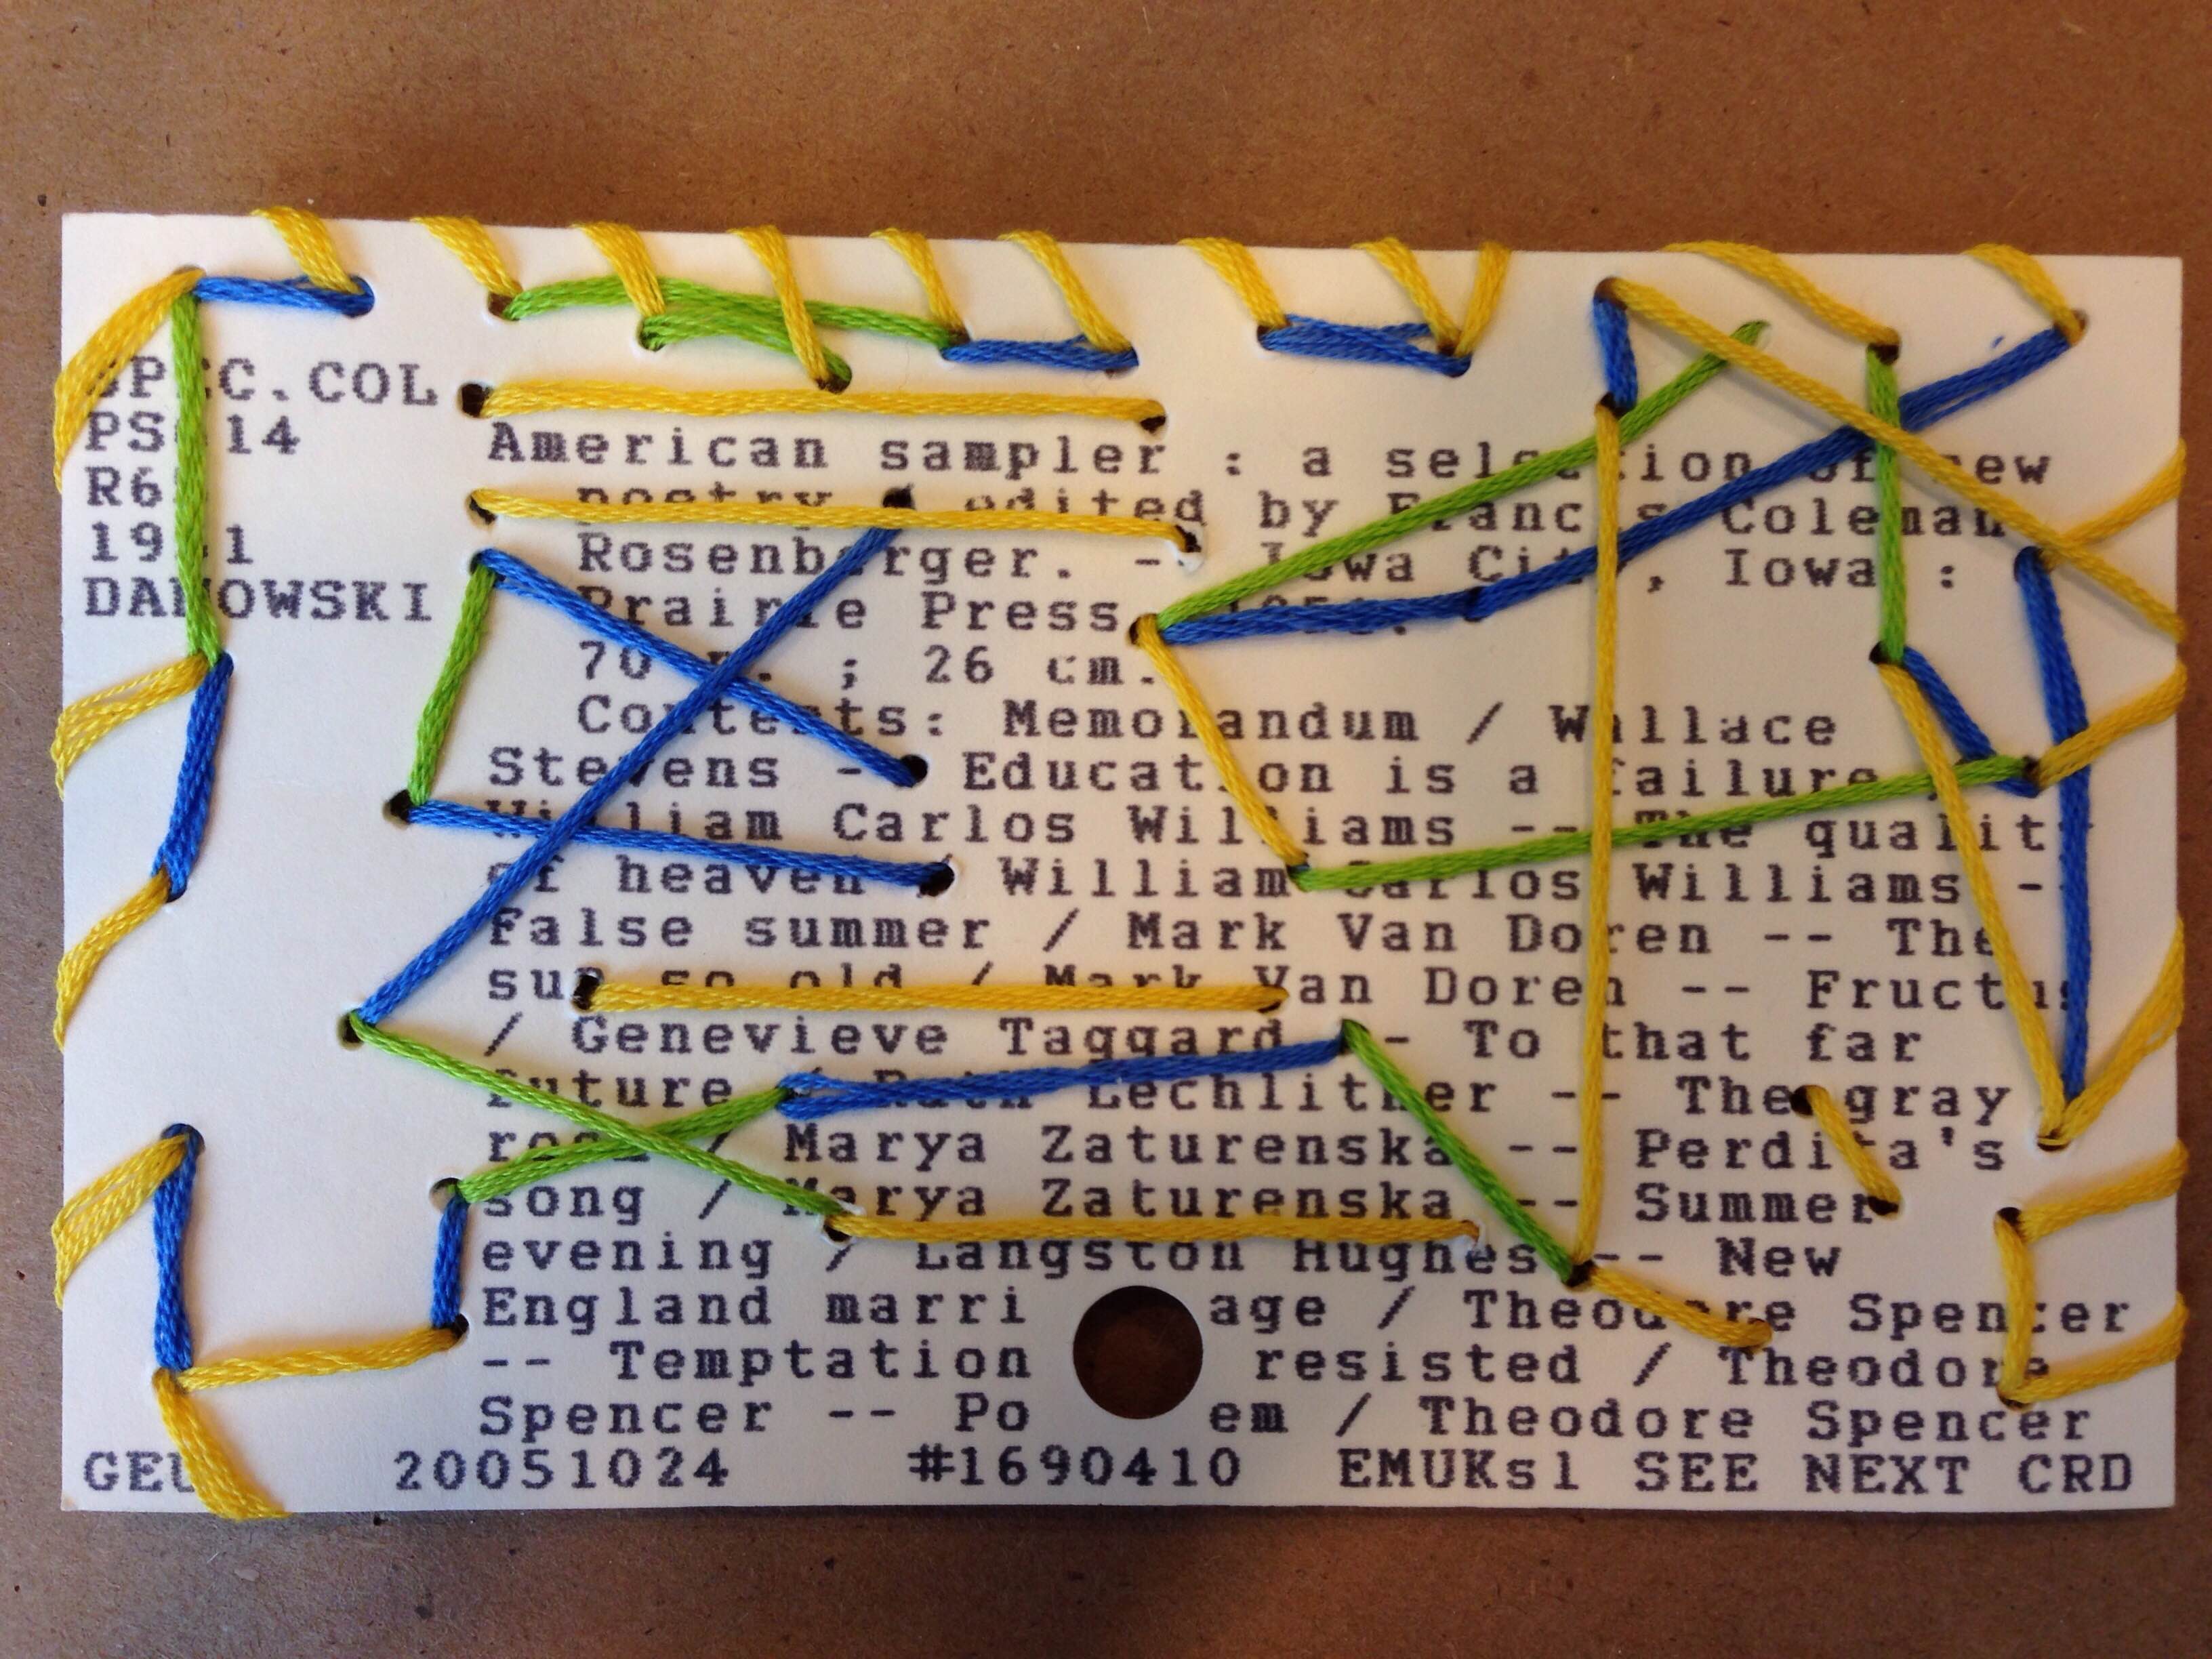 Card catalog card sewn in a random pattern with green, blue, and yellow embroidery thread.